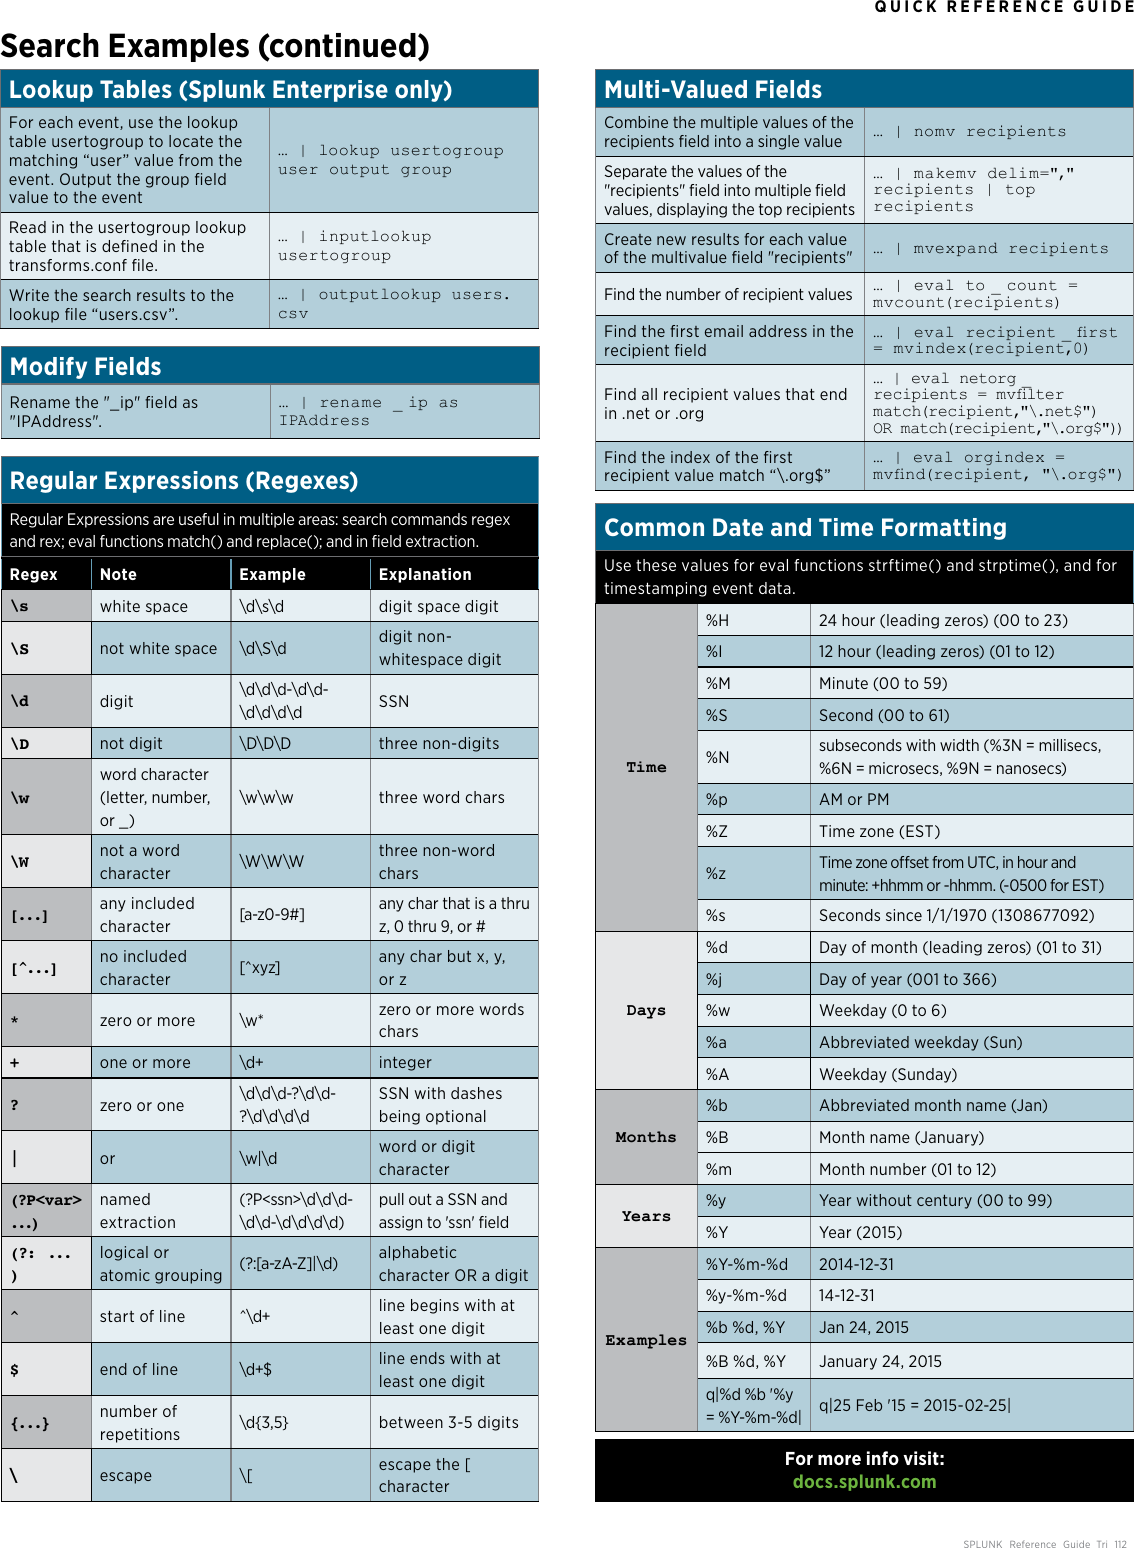 Page 6 of 6 - Splunk-quick-reference-guide